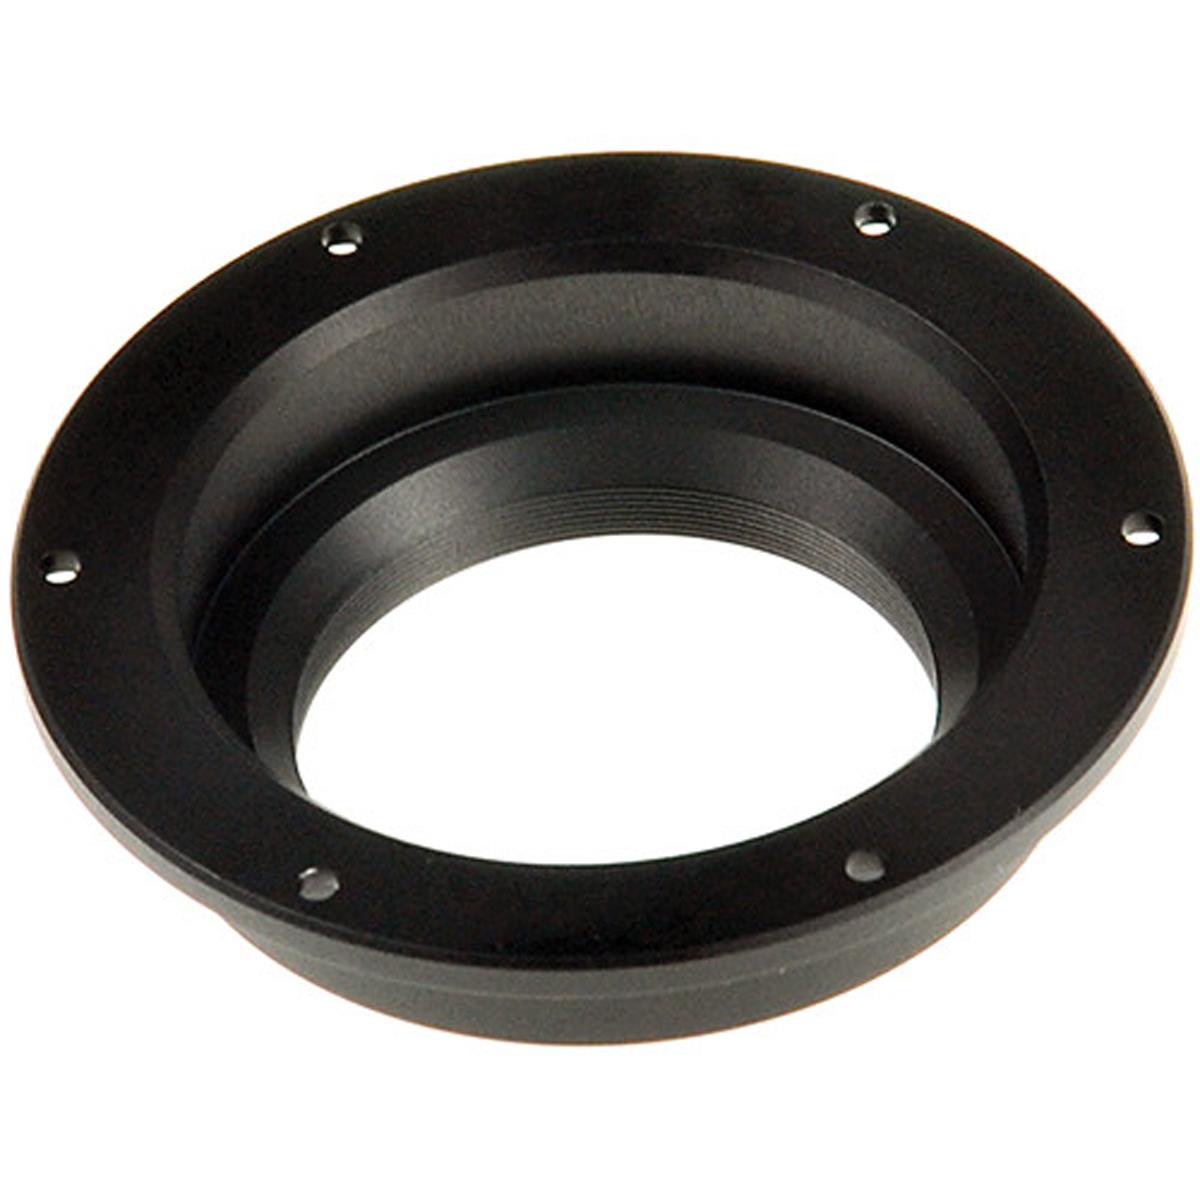 Image of 16x9 Lens Mount for Micro Four-Thirds Mount